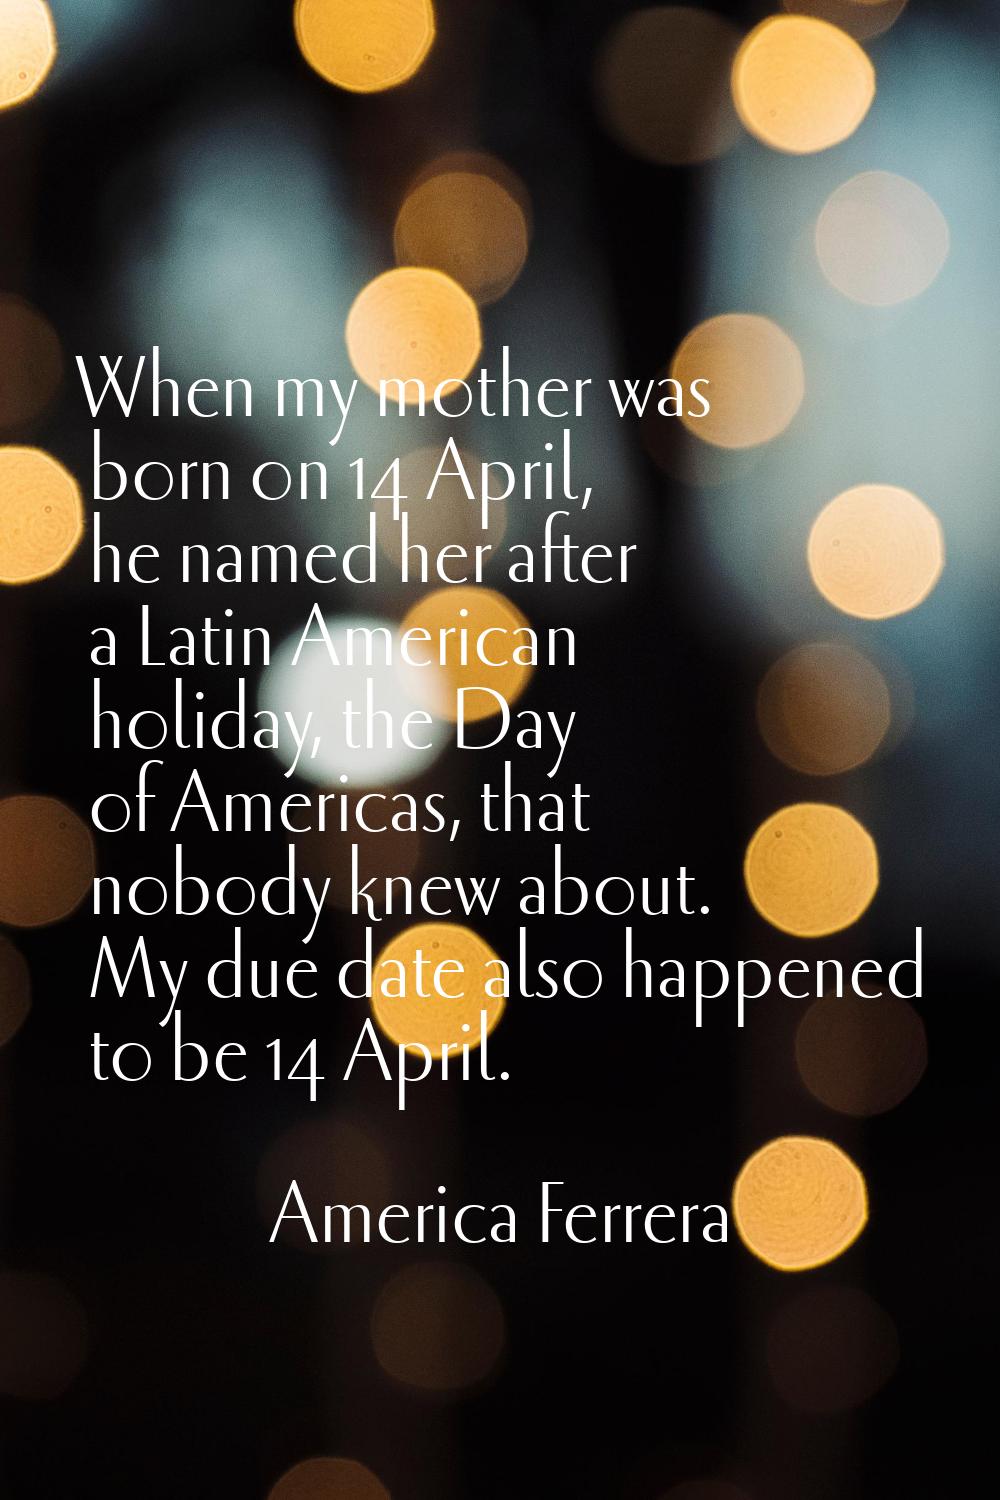 When my mother was born on 14 April, he named her after a Latin American holiday, the Day of Americ